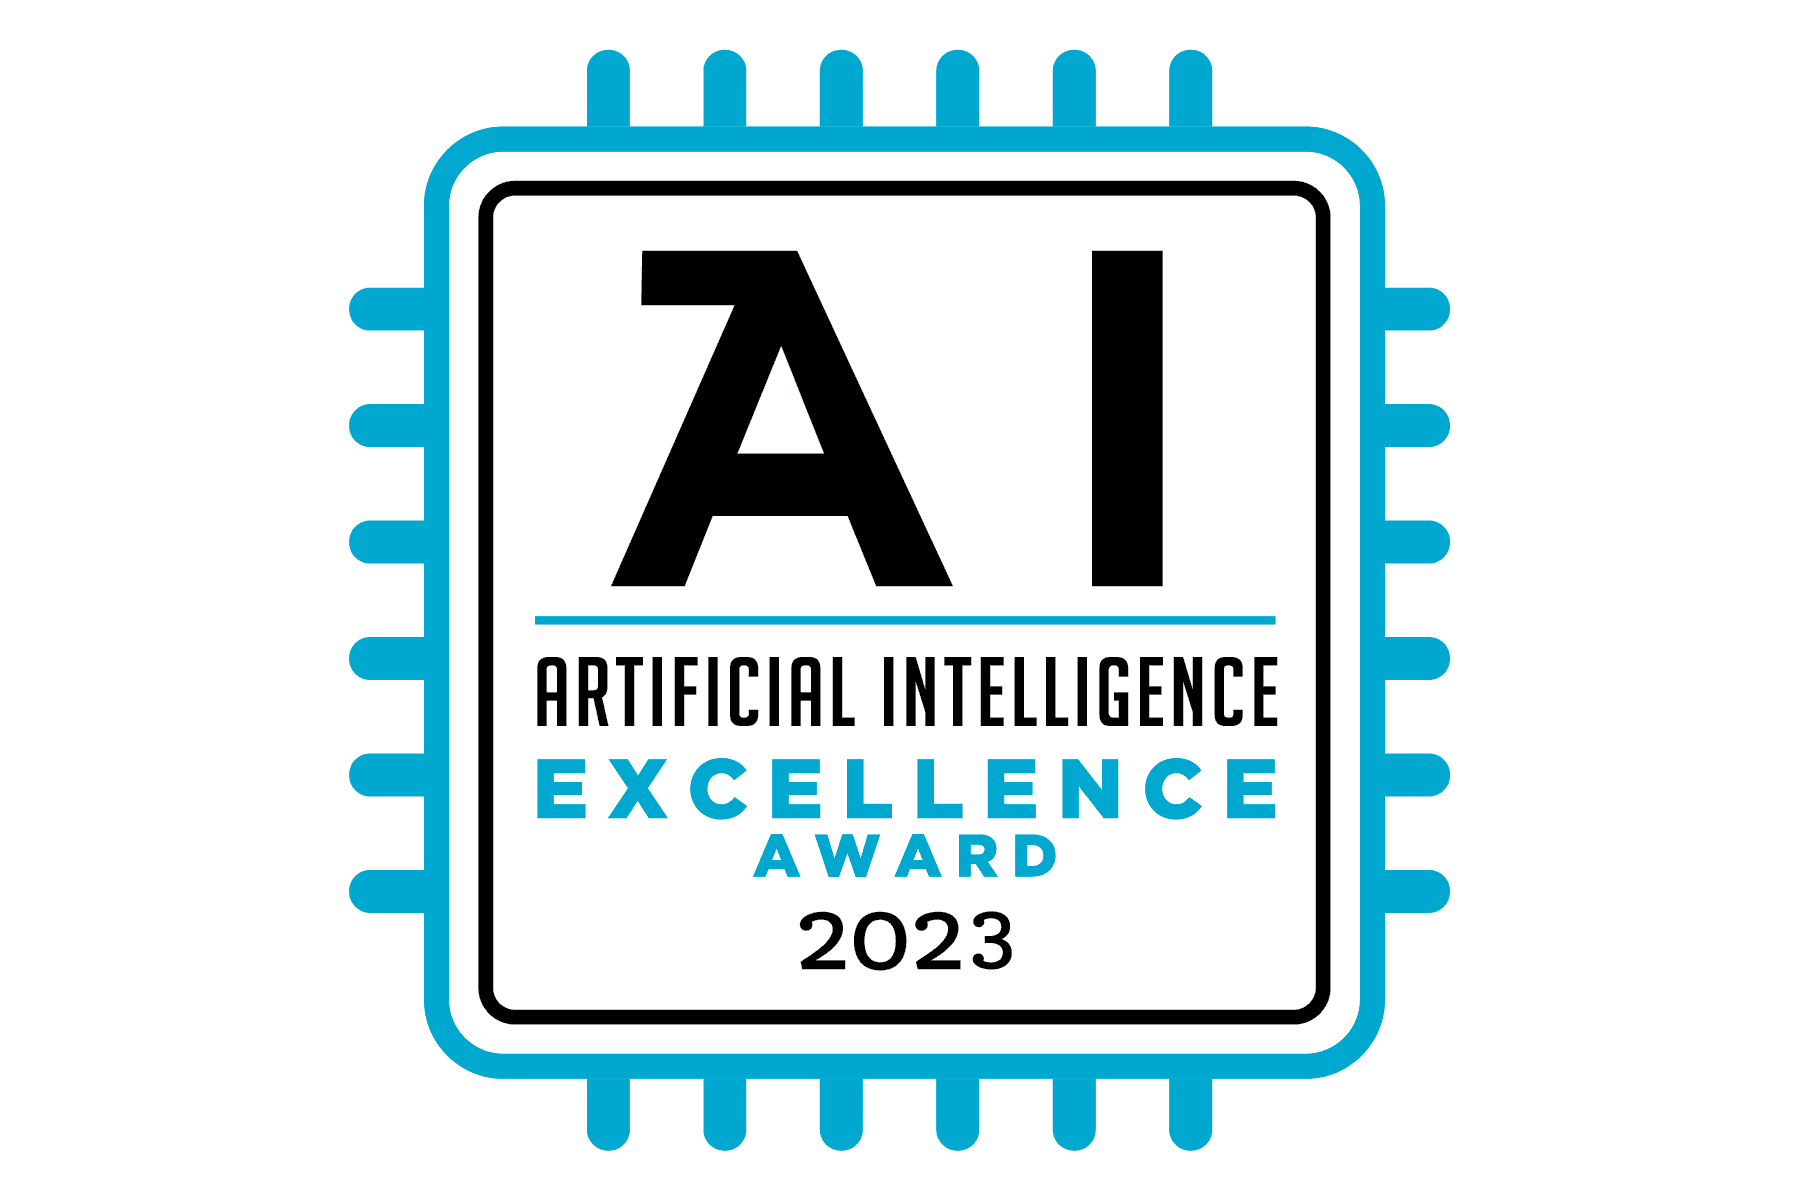 The Latest Article: Righthand robotics named winner in 2023 artificial intelligence excellence awards